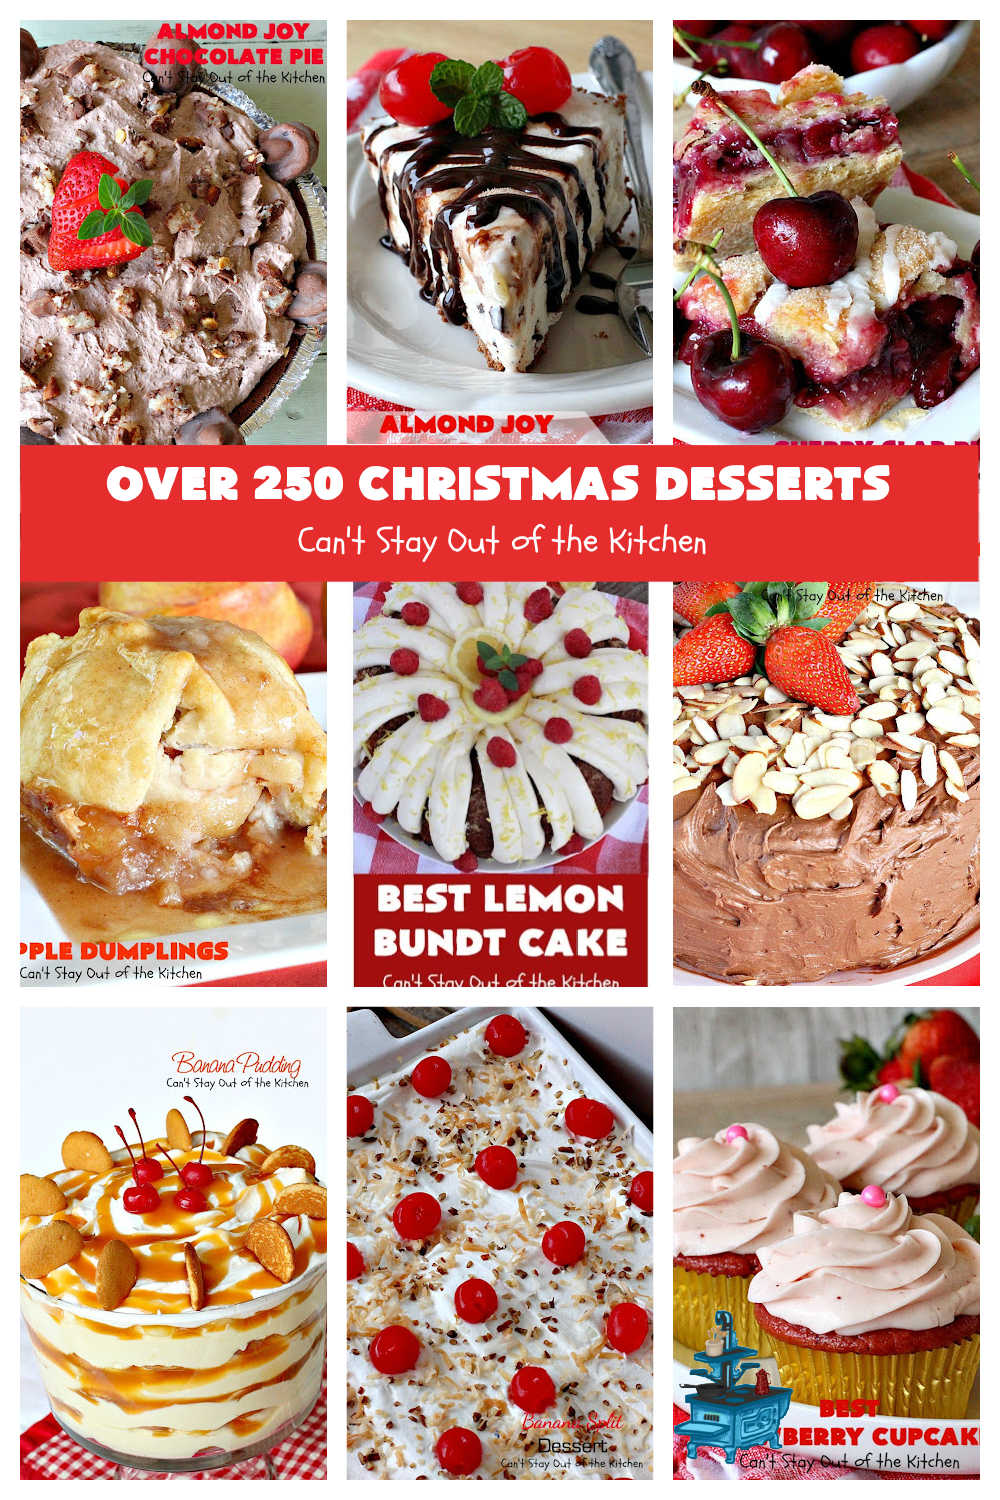 Over 250 Christmas Desserts | Can't Stay Out of the Kitchen | 250+ #desserts including #cakes, #cheesecakes, #cobblers, #pies #brownies, #trifles & #puddings for #Christmas or other #holidays #ChristmasDesserts #Over250ChristmasDesserts #HolidayDesserts